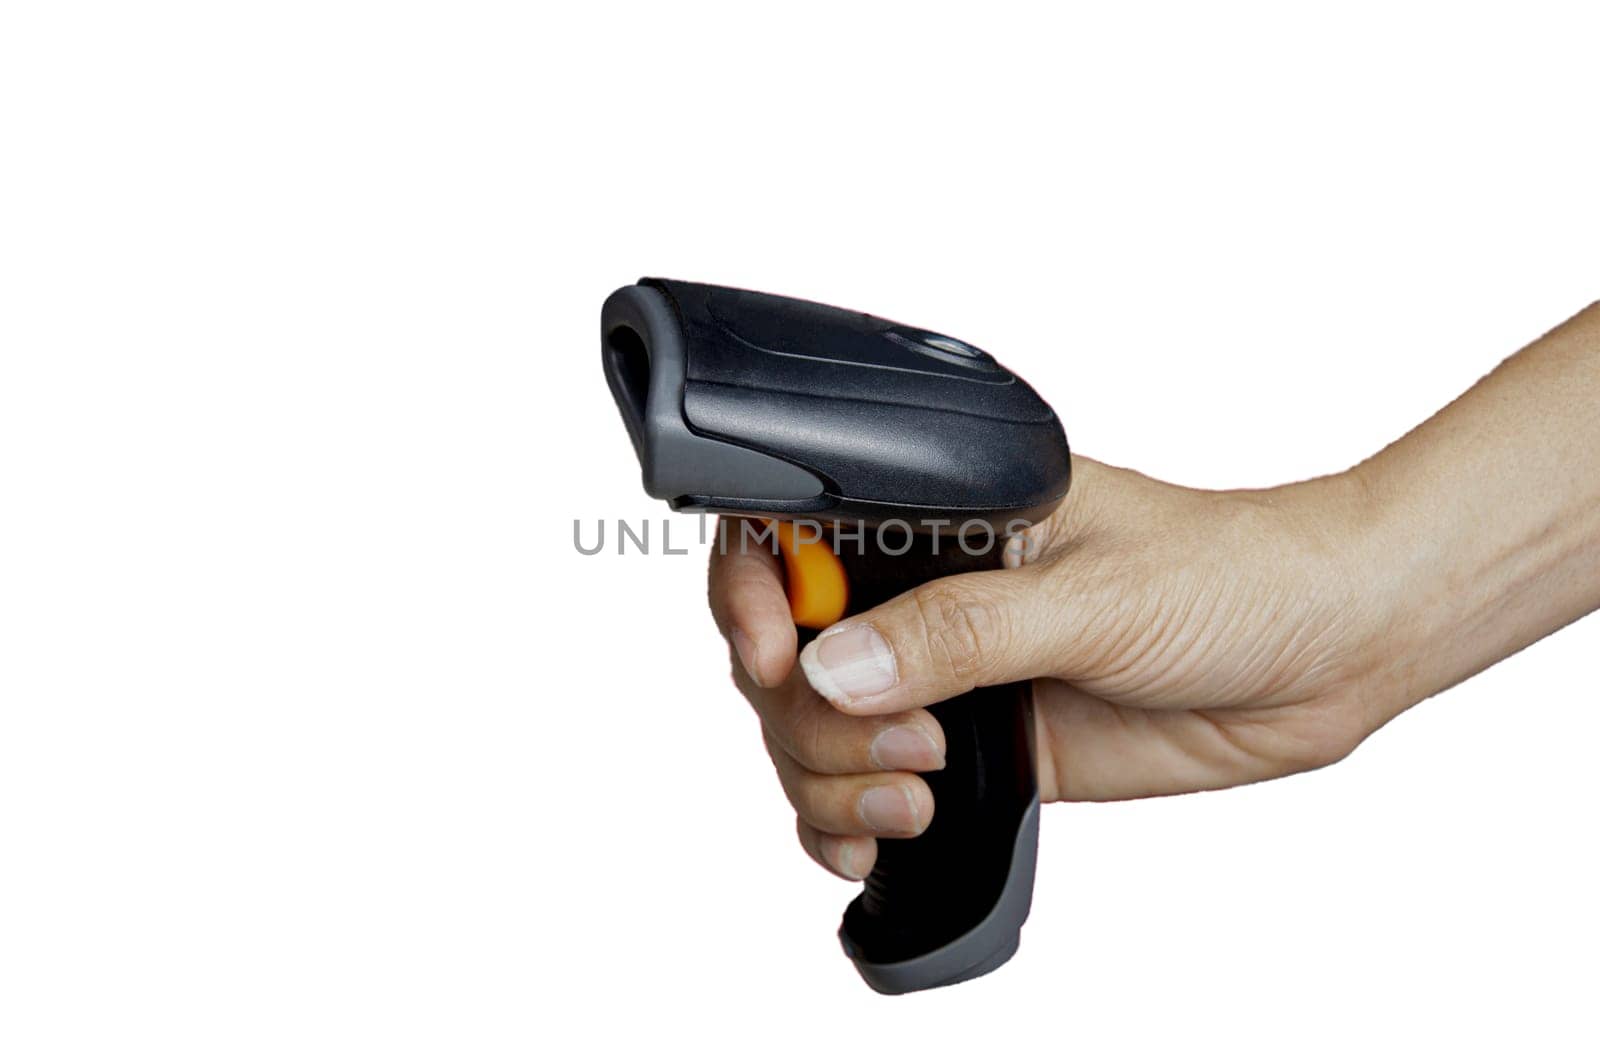 mobile scanner in hand (with clipping path)